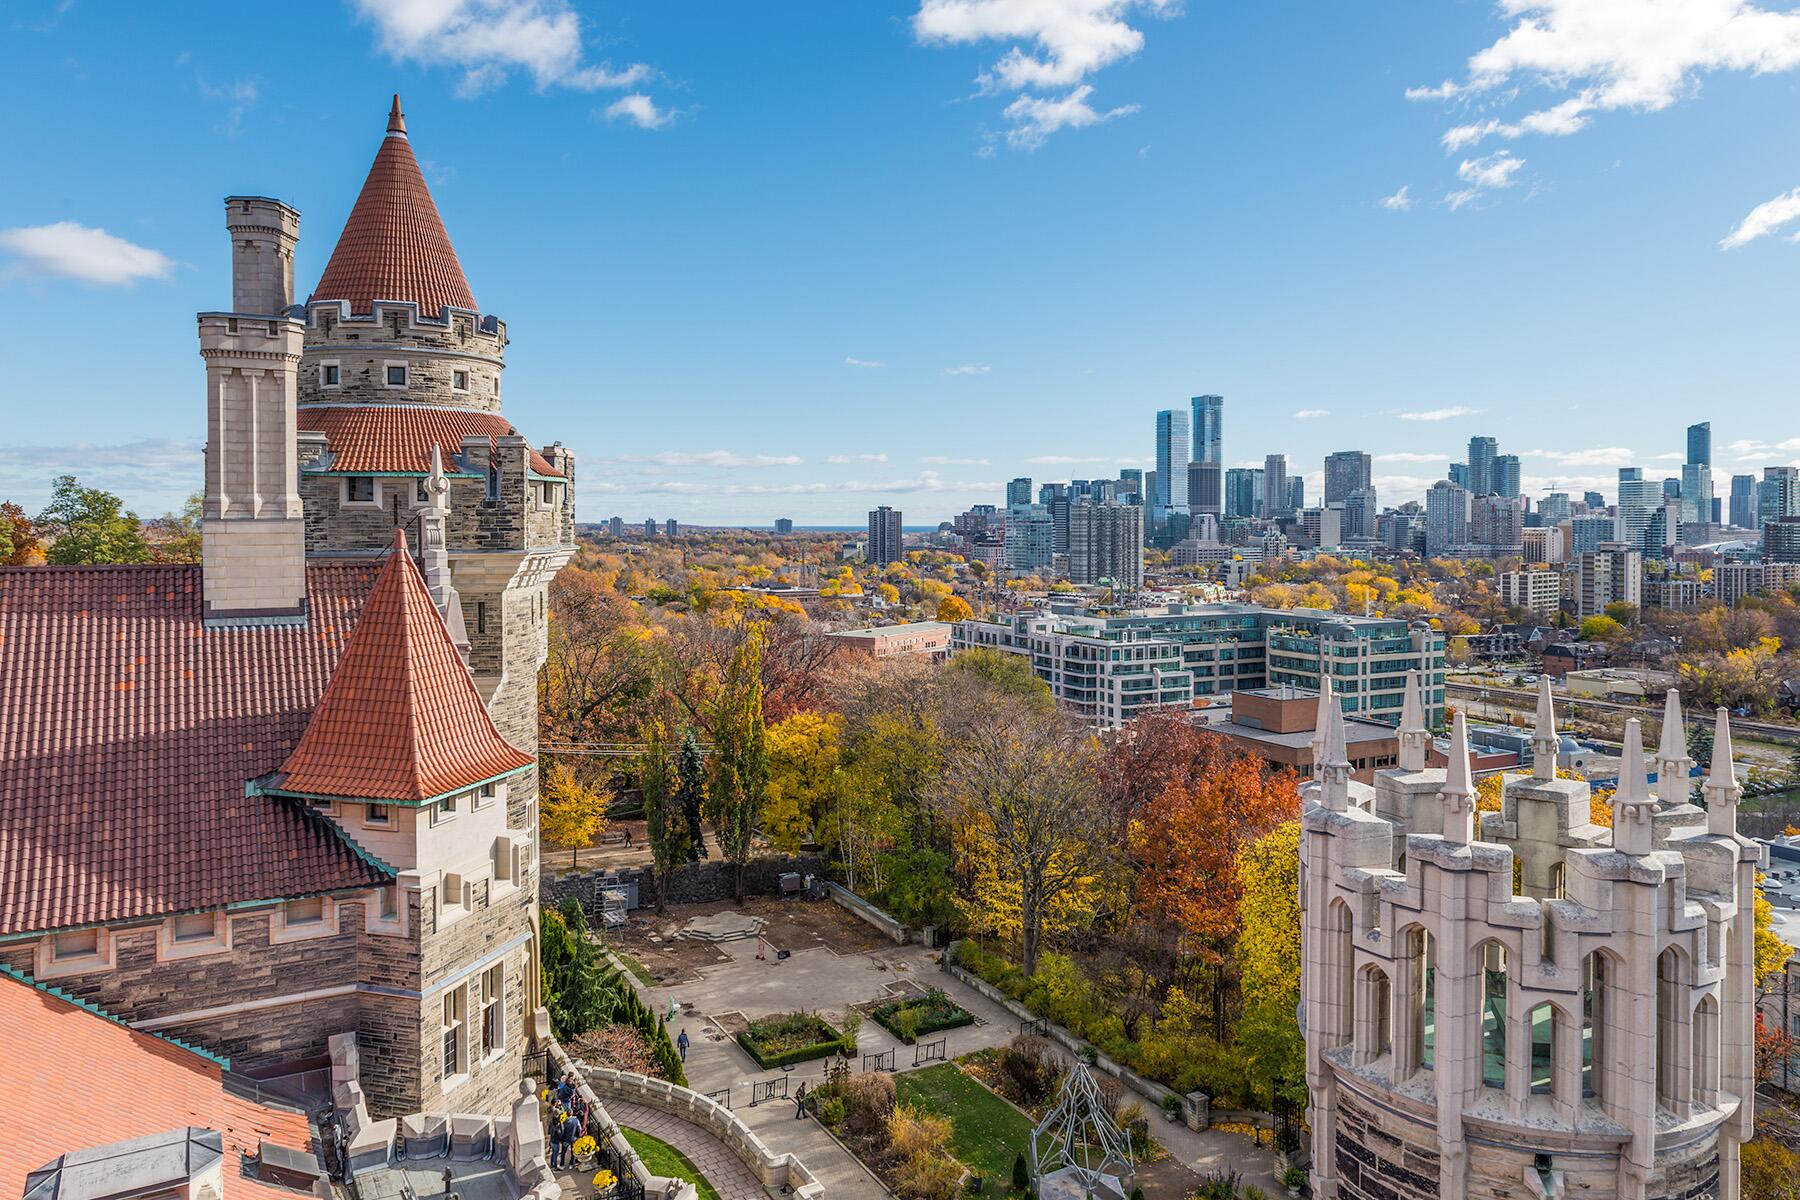 <a href='https://www.fodors.com/world/north-america/canada/ontario/toronto/experiences/news/photos/10-ultimate-things-to-do-in-toronto#'>From &quot;11 Ultimate Things to Do in Toronto&quot;</a>